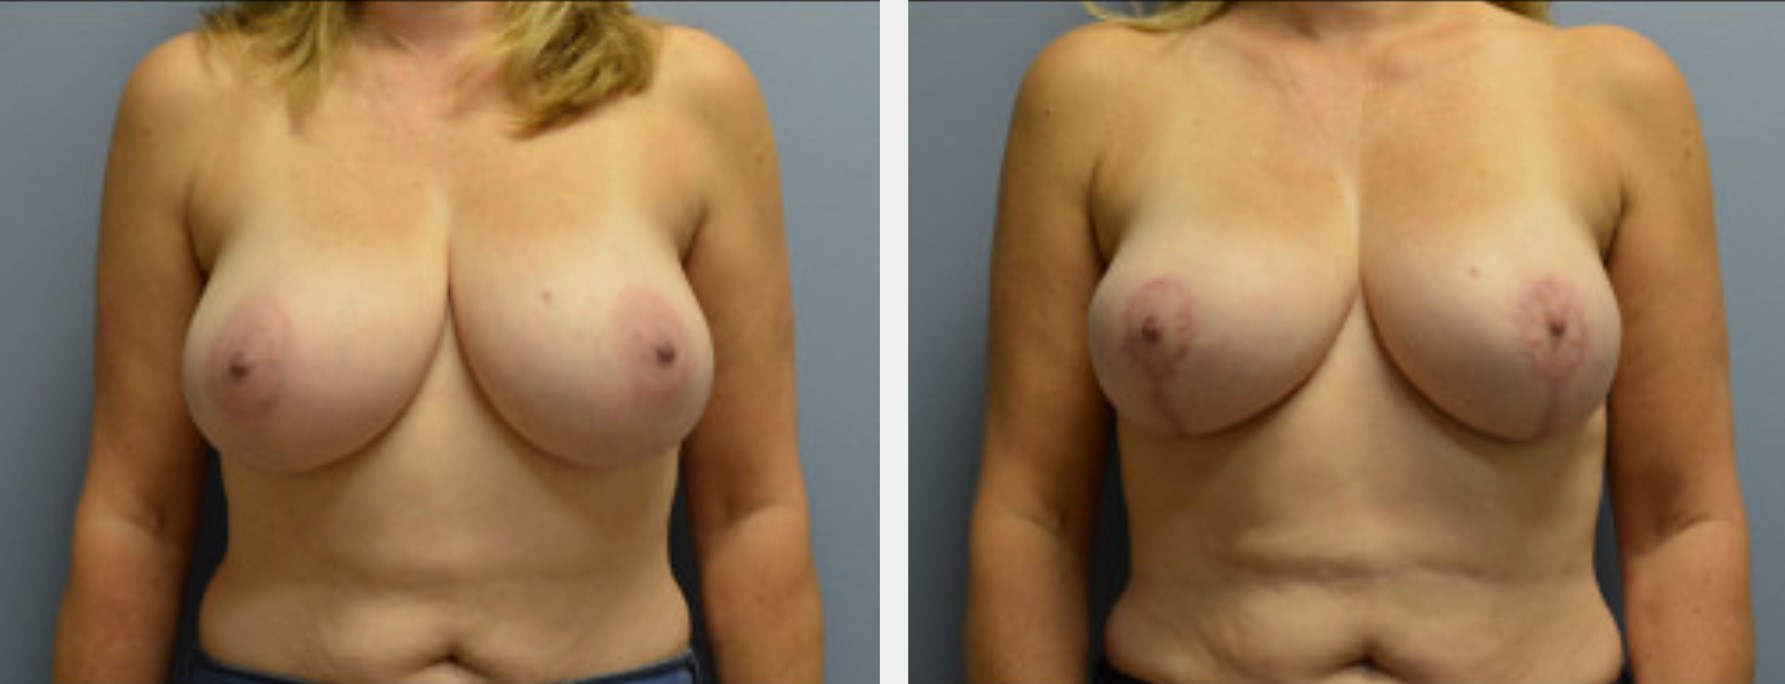 before & after image of breast reduction performed by dr. jessica belz